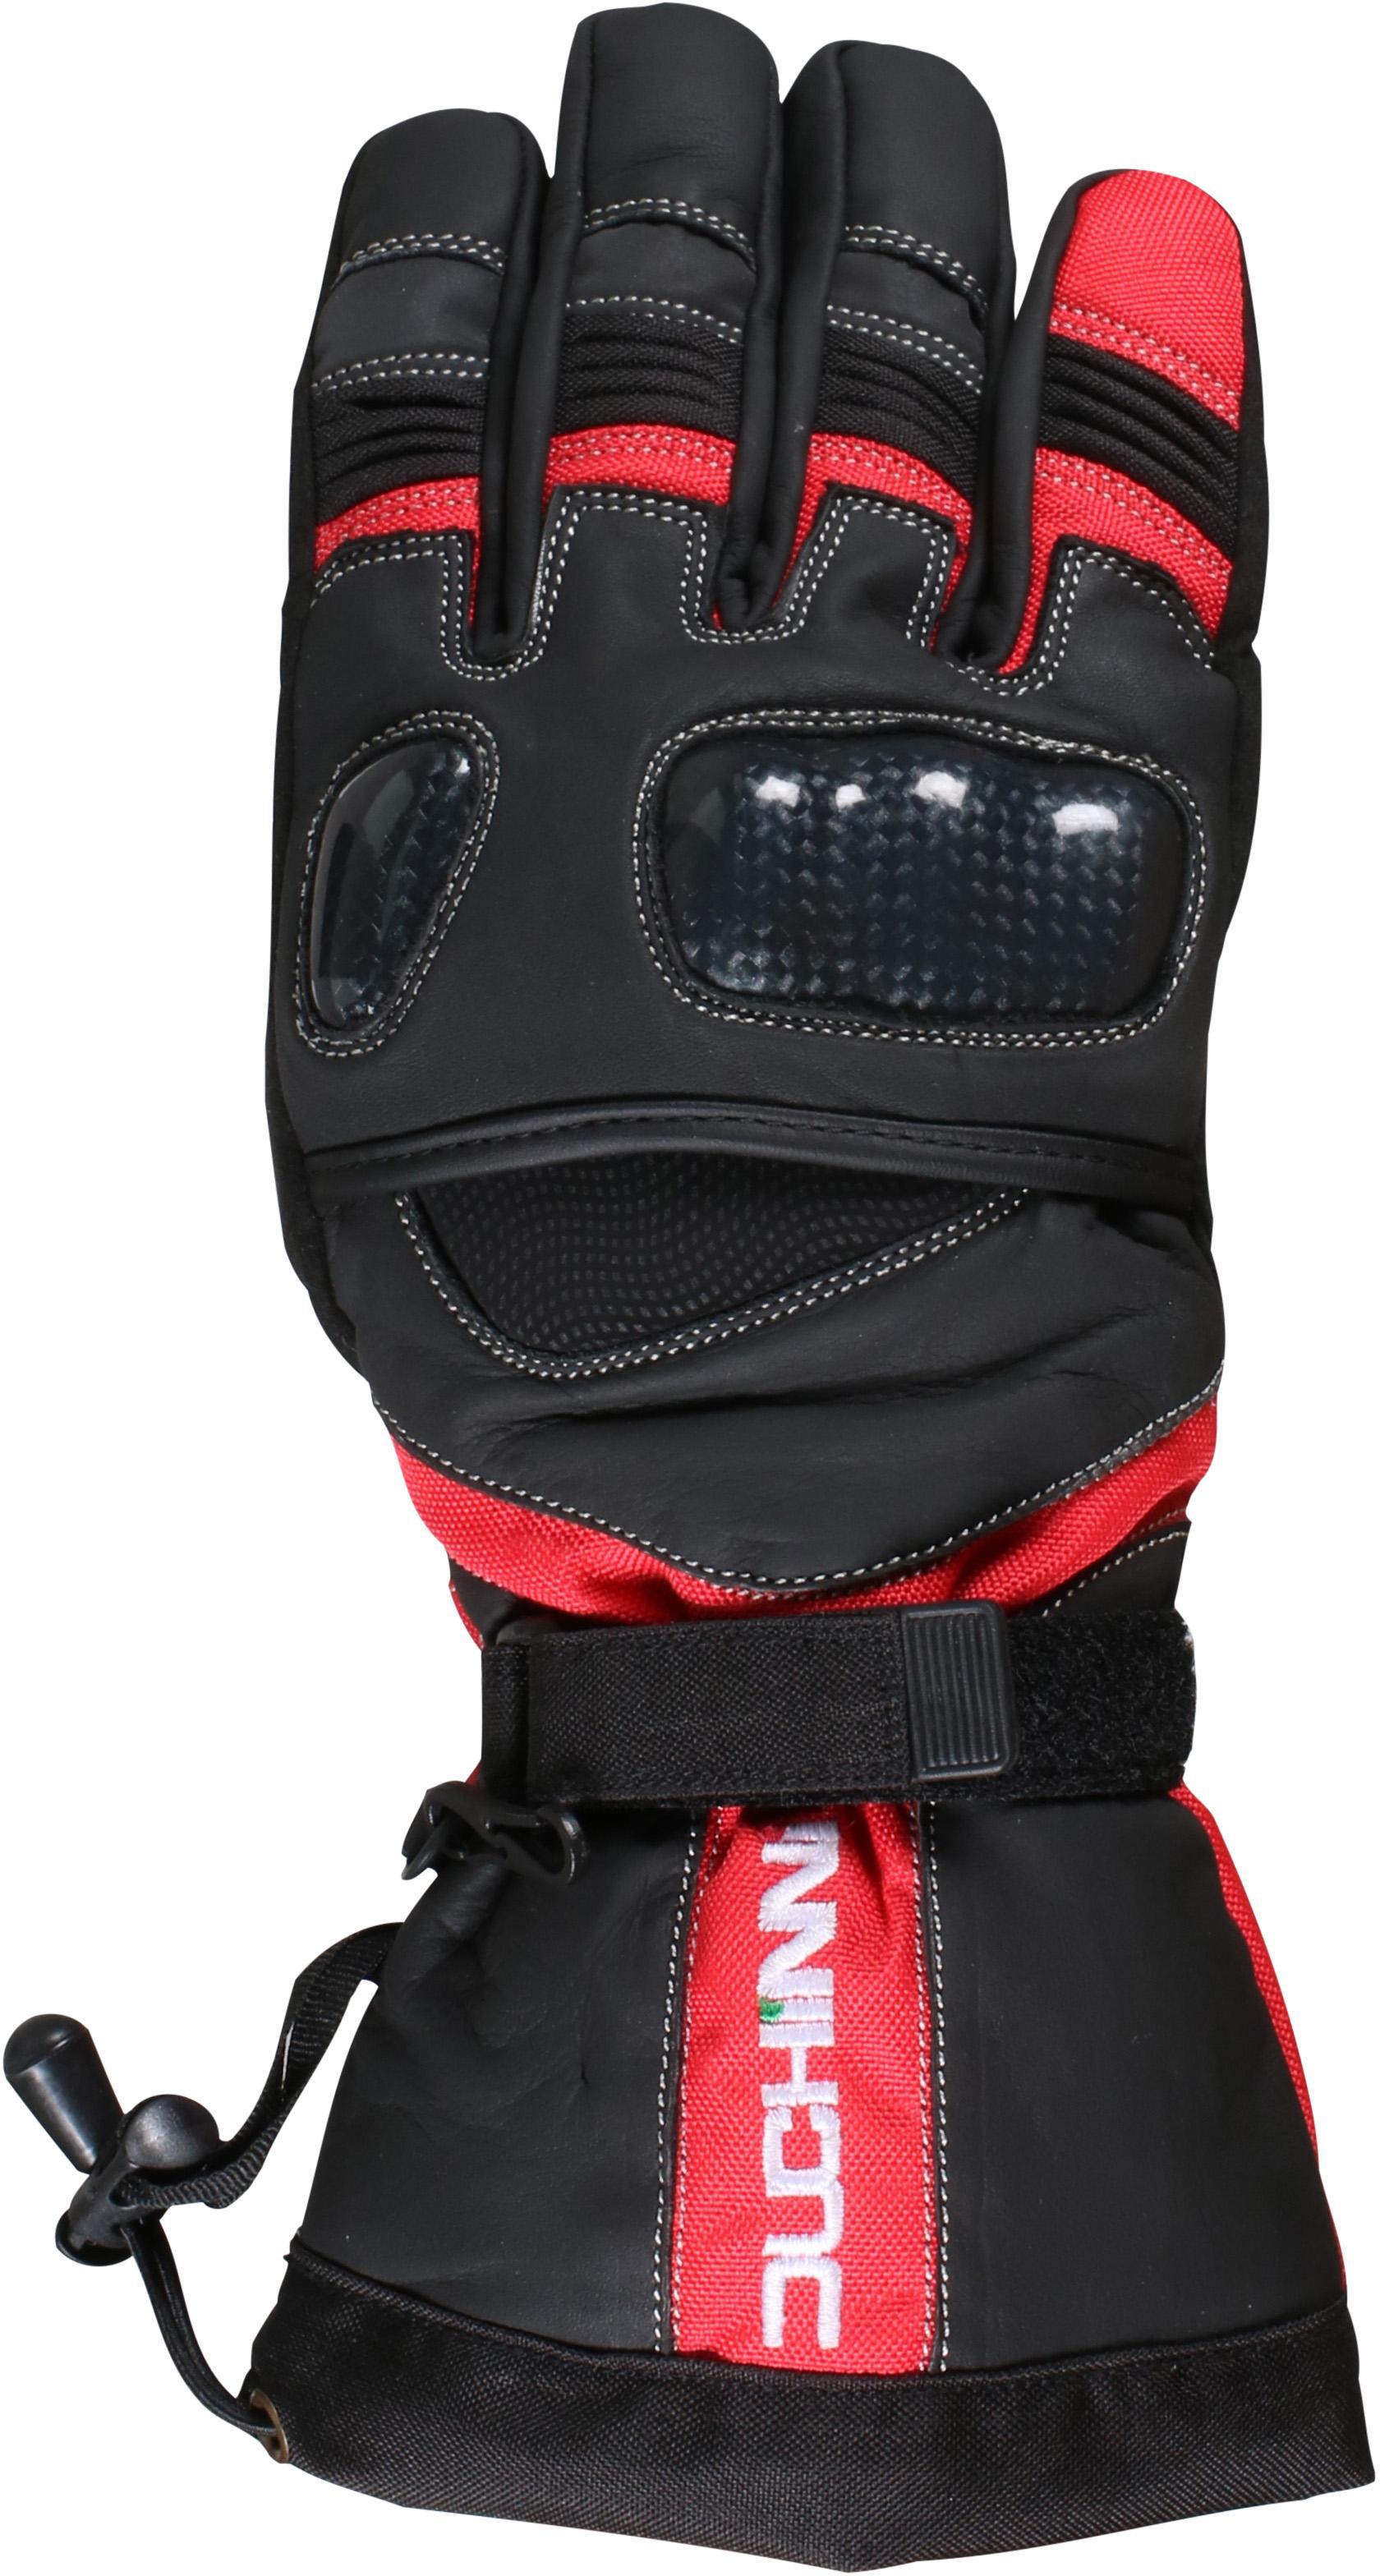 Duchinni Yukon Motorcycle Gloves - Black And Red, L